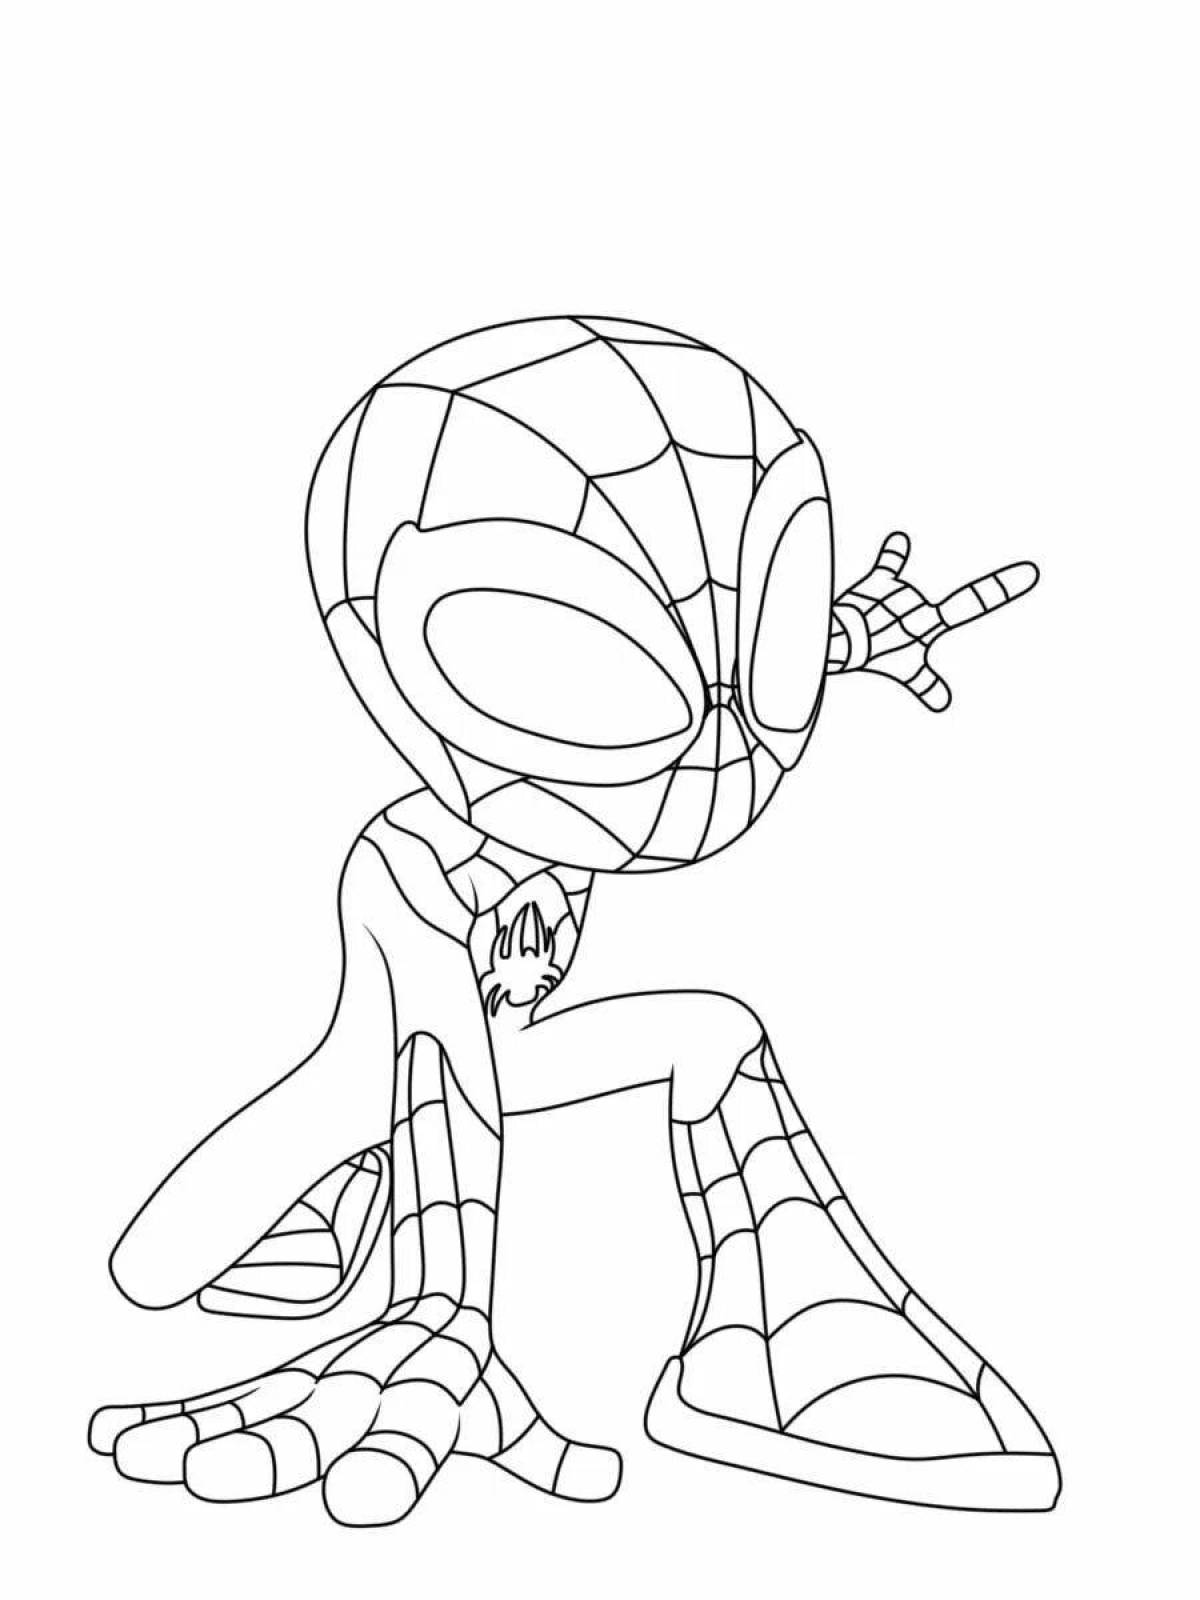 Spider-Man ghost coloring page